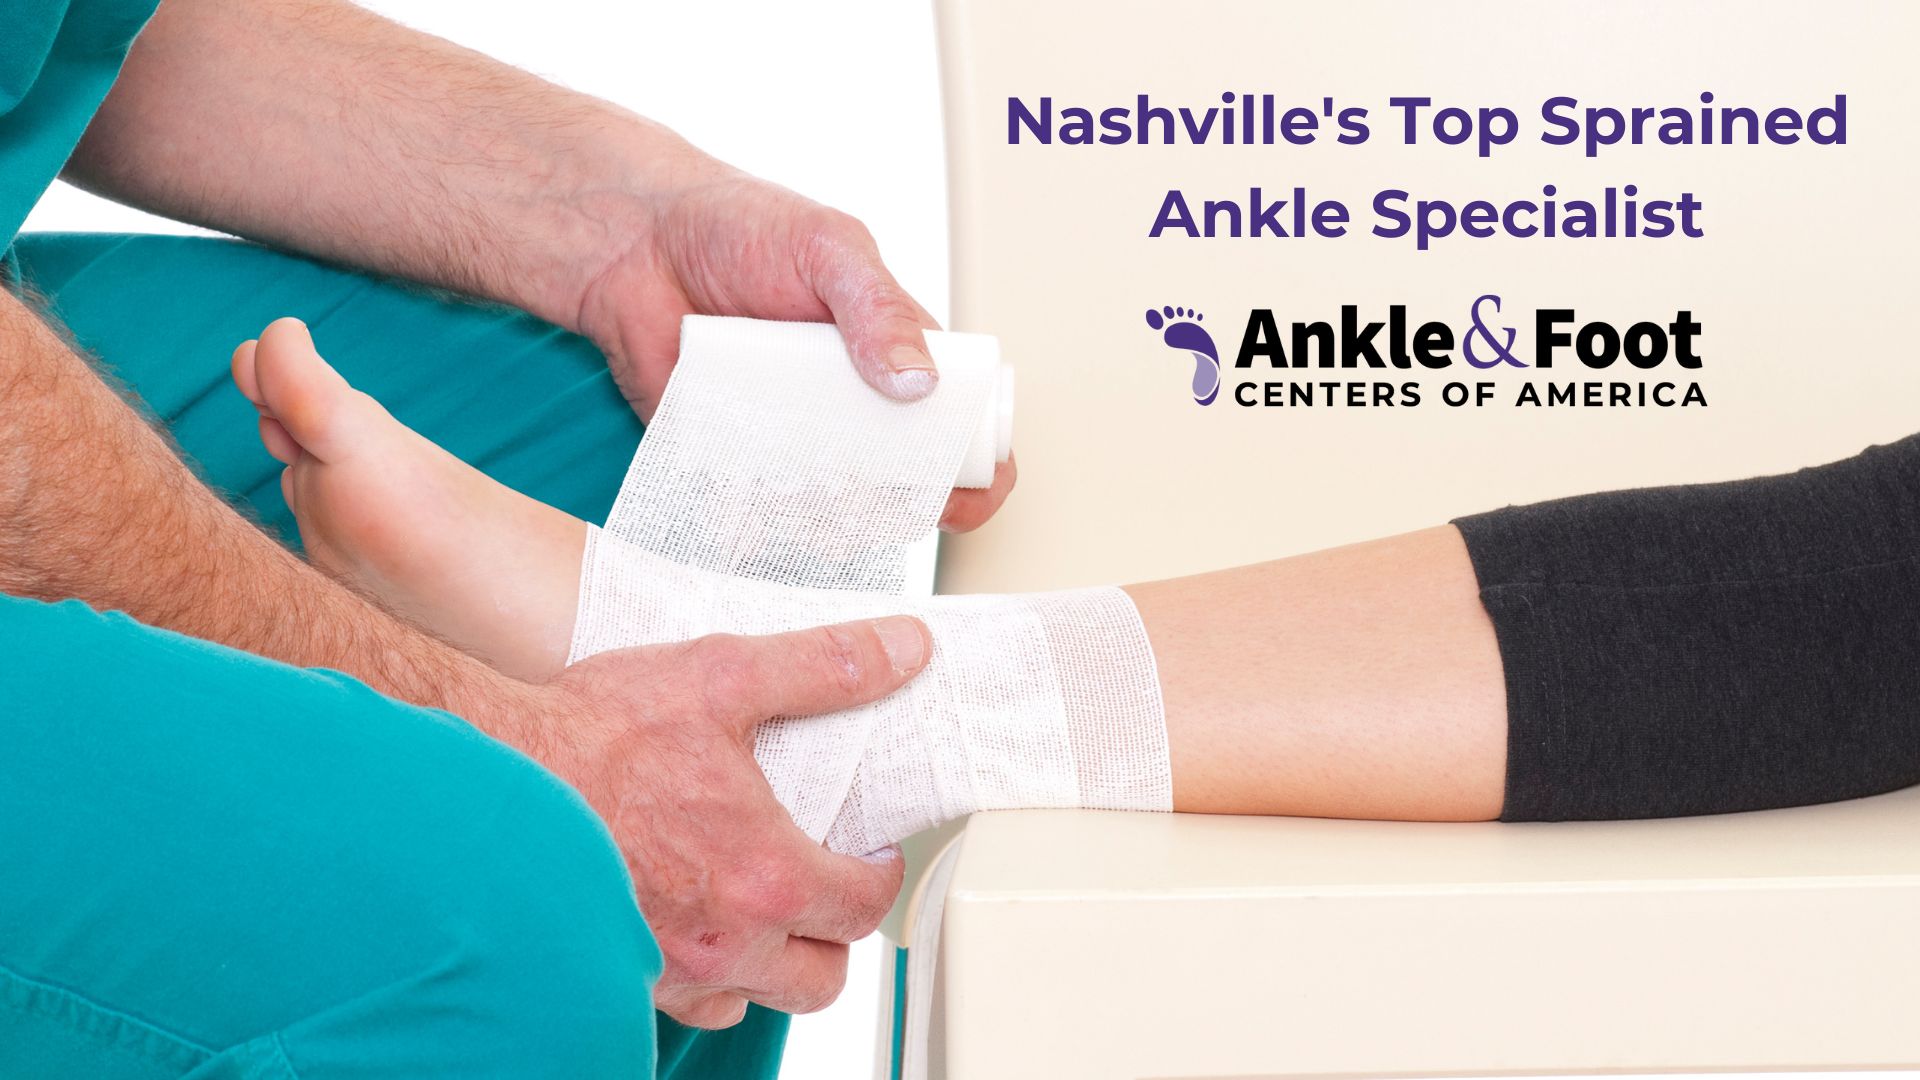 Nashville’s Top Sprained Ankle Specialist